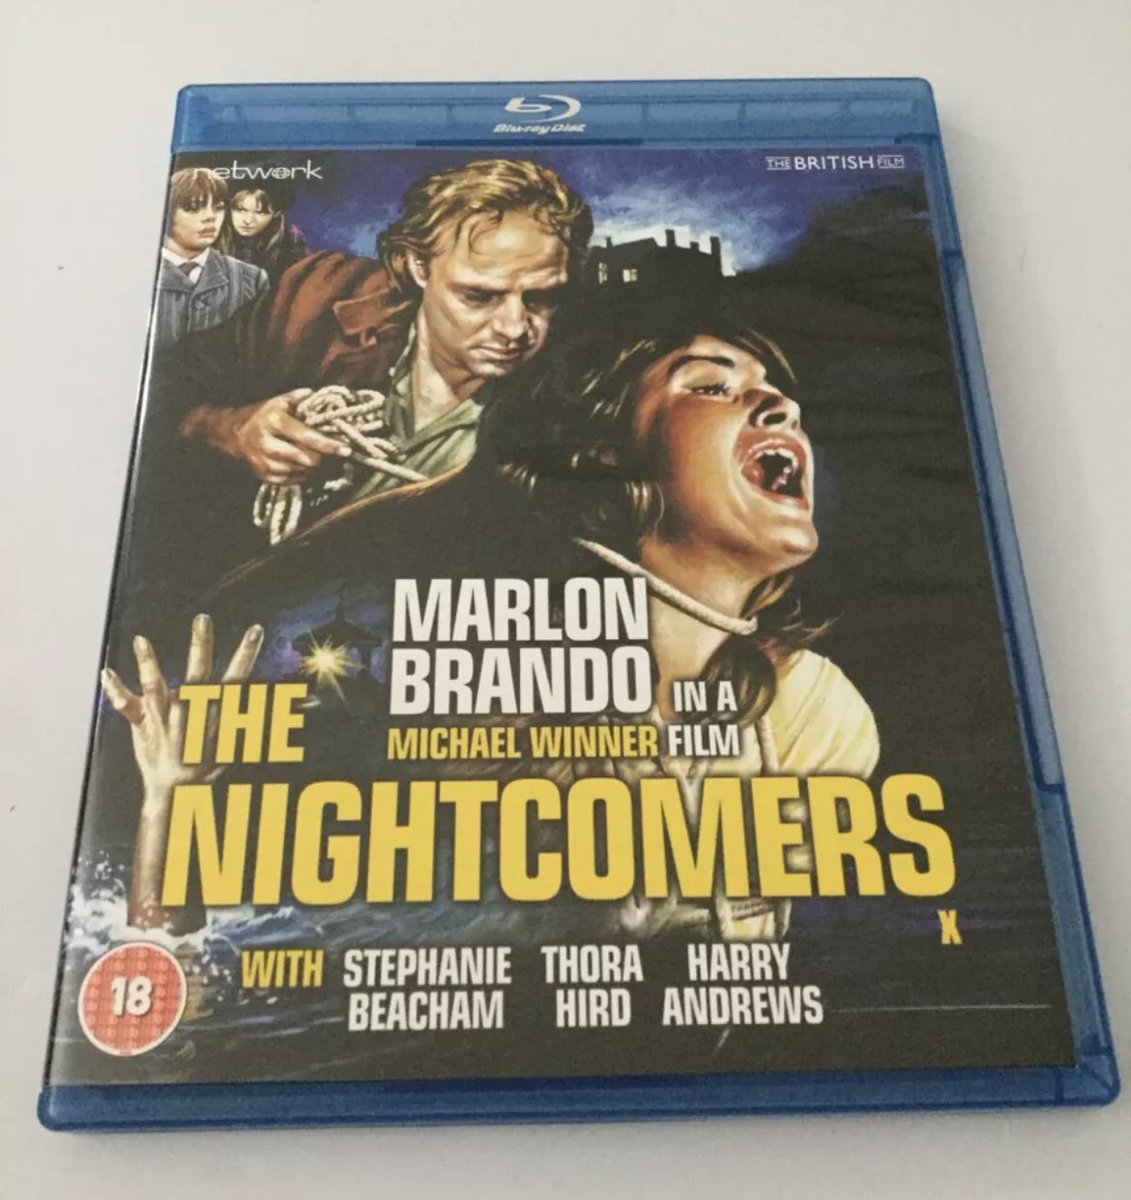 Merely looked at a Michael Winner blu ray on eBay and two hours later they emailed ME offering me it at a lower price! You’d think they were keen to get rid of it. 
Another Win(ner).